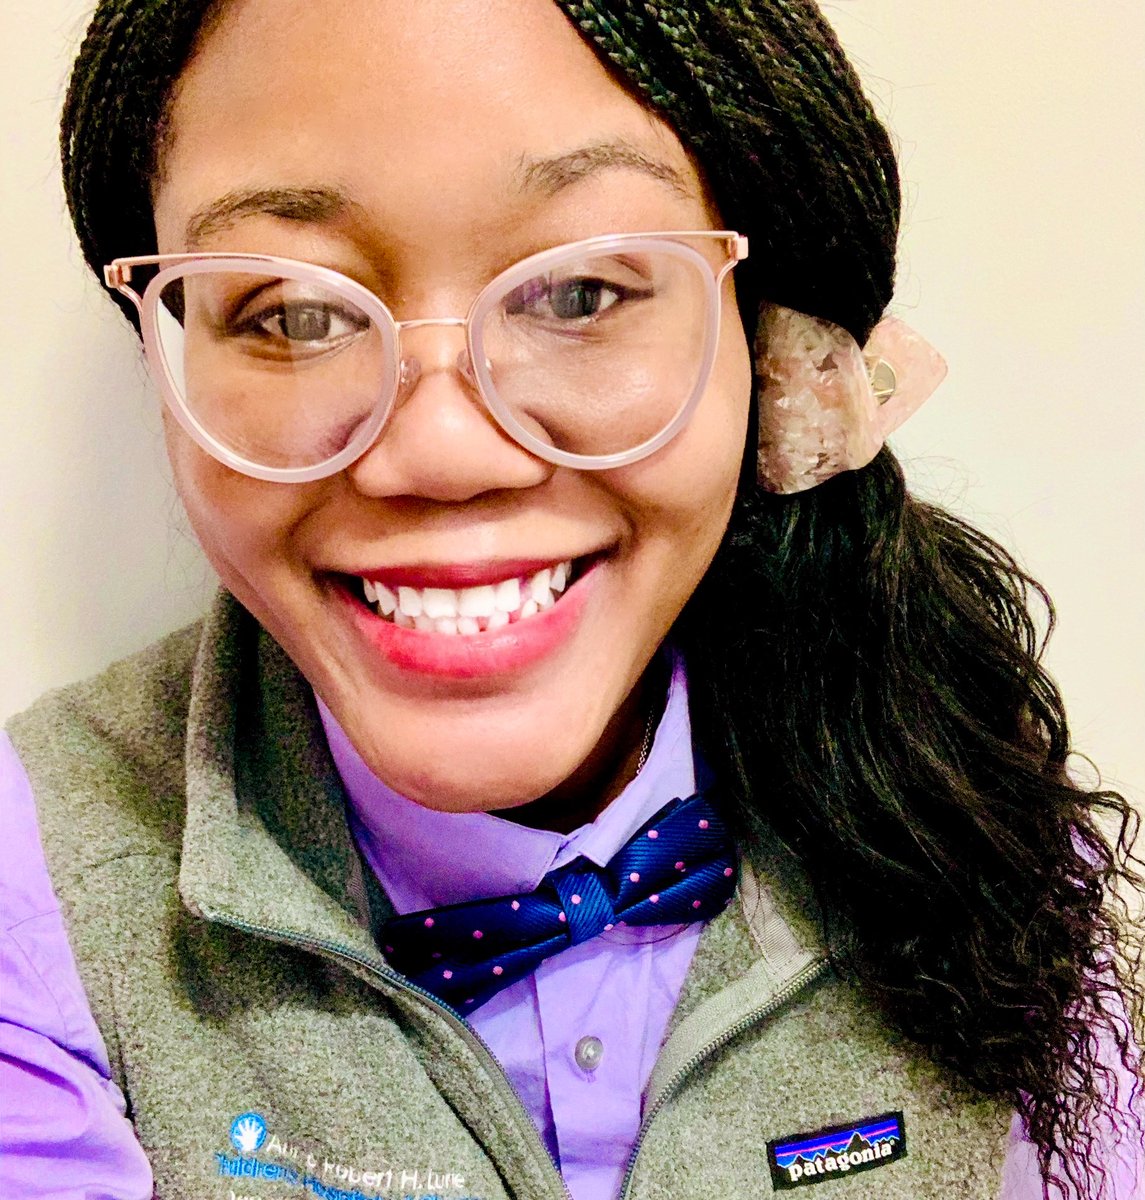 Our newest print book, Girl In A Bowtie: Lessons of a Pediatric Resident, is now on sale: tinyurl.com/girlinabowtie

Join Dr. @OMETinyHeartsMD for her first novella, with each chapter recounting lessons she learned during her #pediatrics residency. #medhum #meded